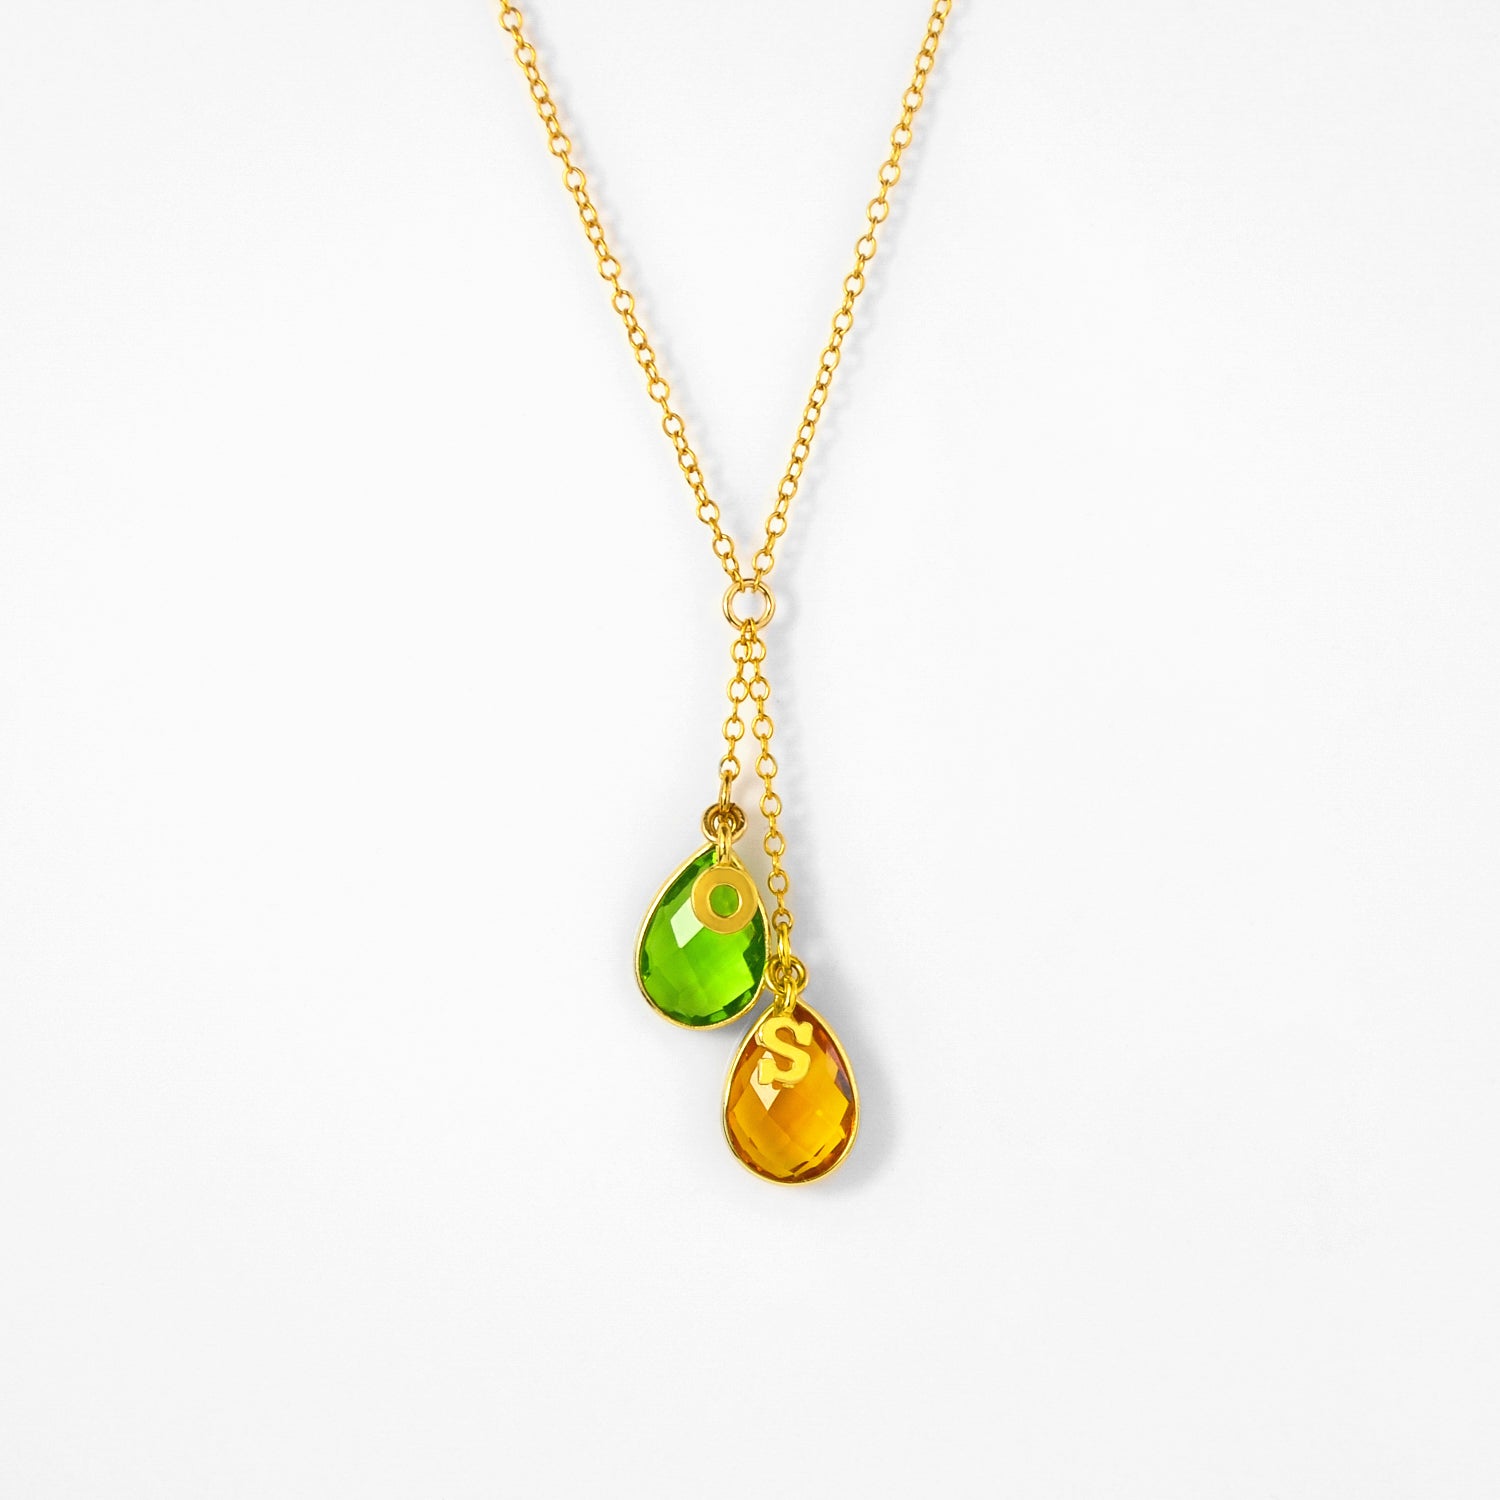 Custom Birthstone Necklace | MIMOSA Handcrafted